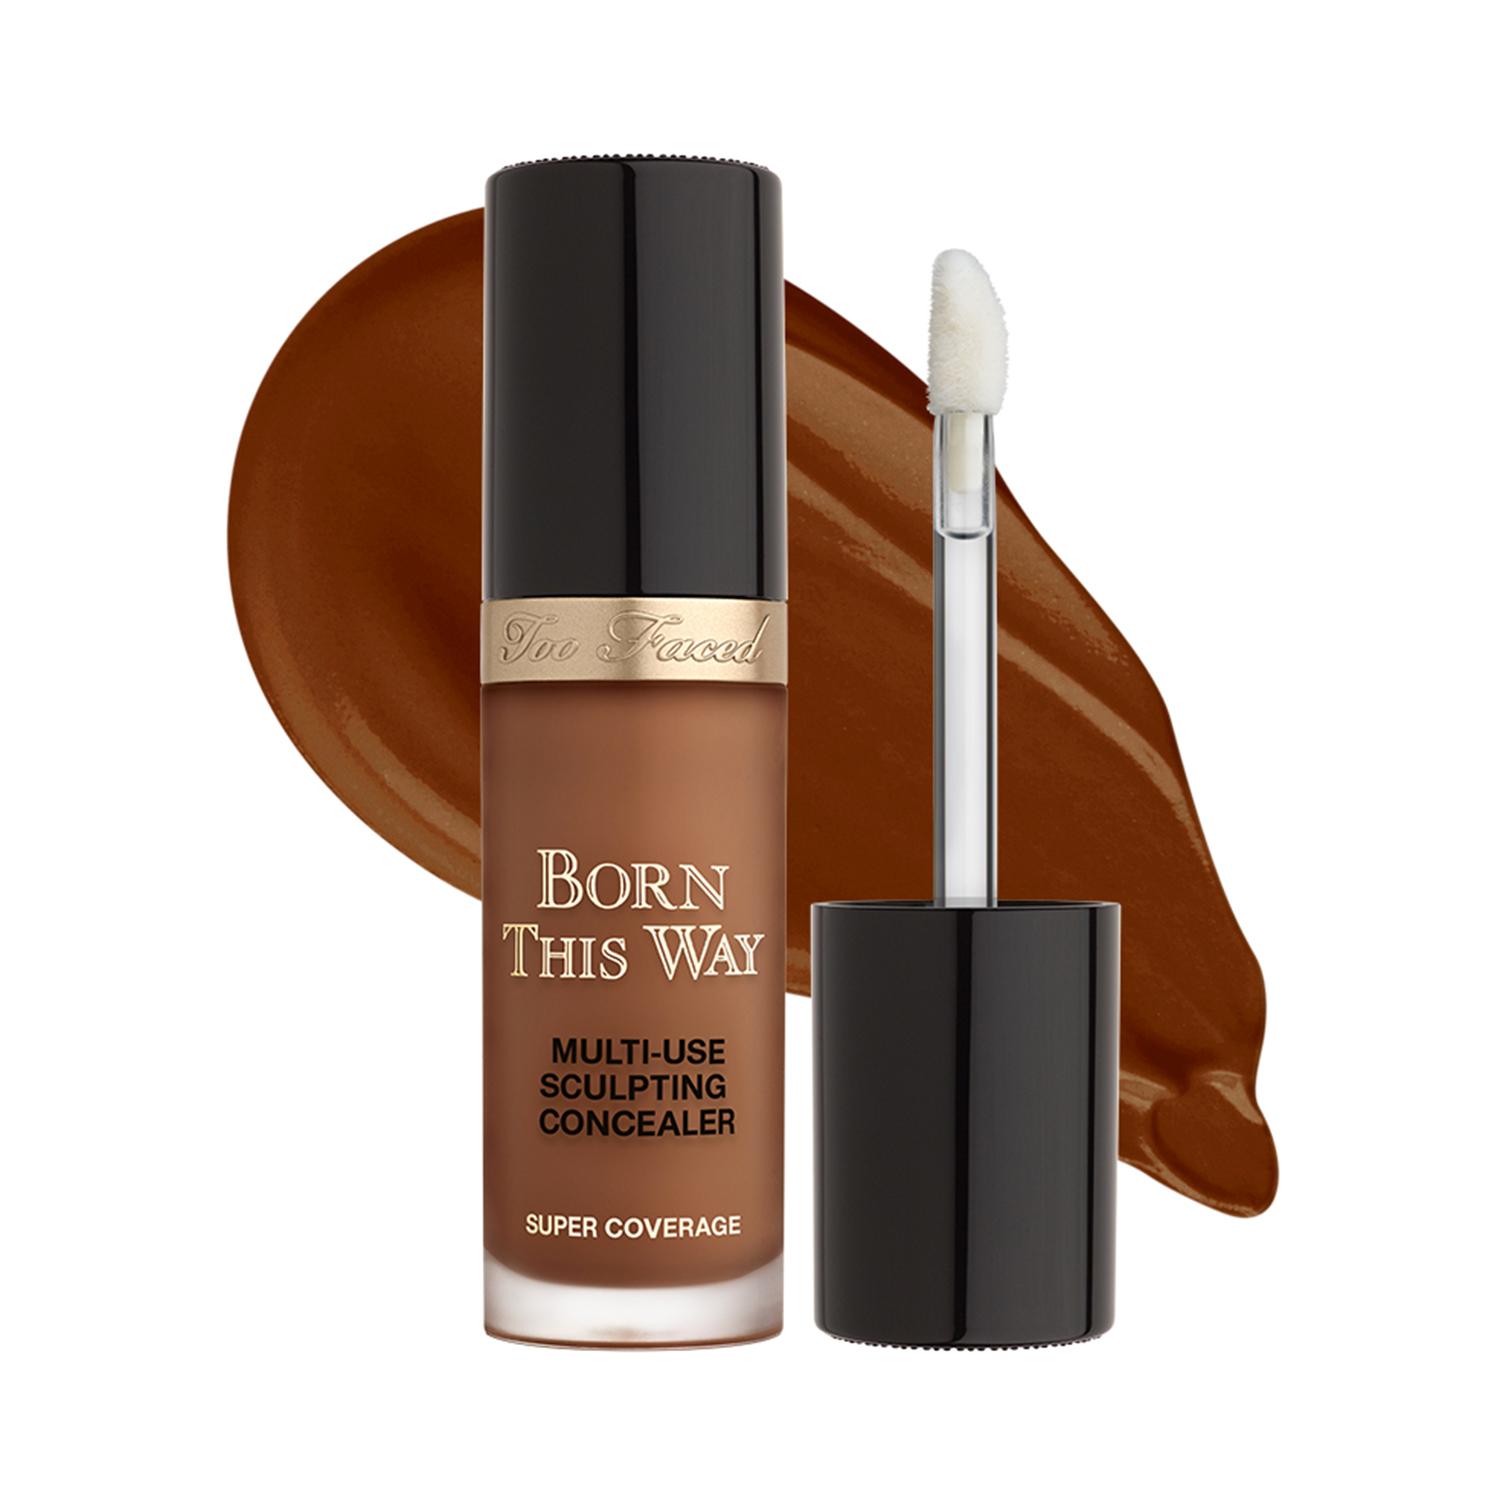 Too Faced | Too Faced Born This Way Super Coverage Multi Use Sculpting Concealer - Cocoa (13.5ml)